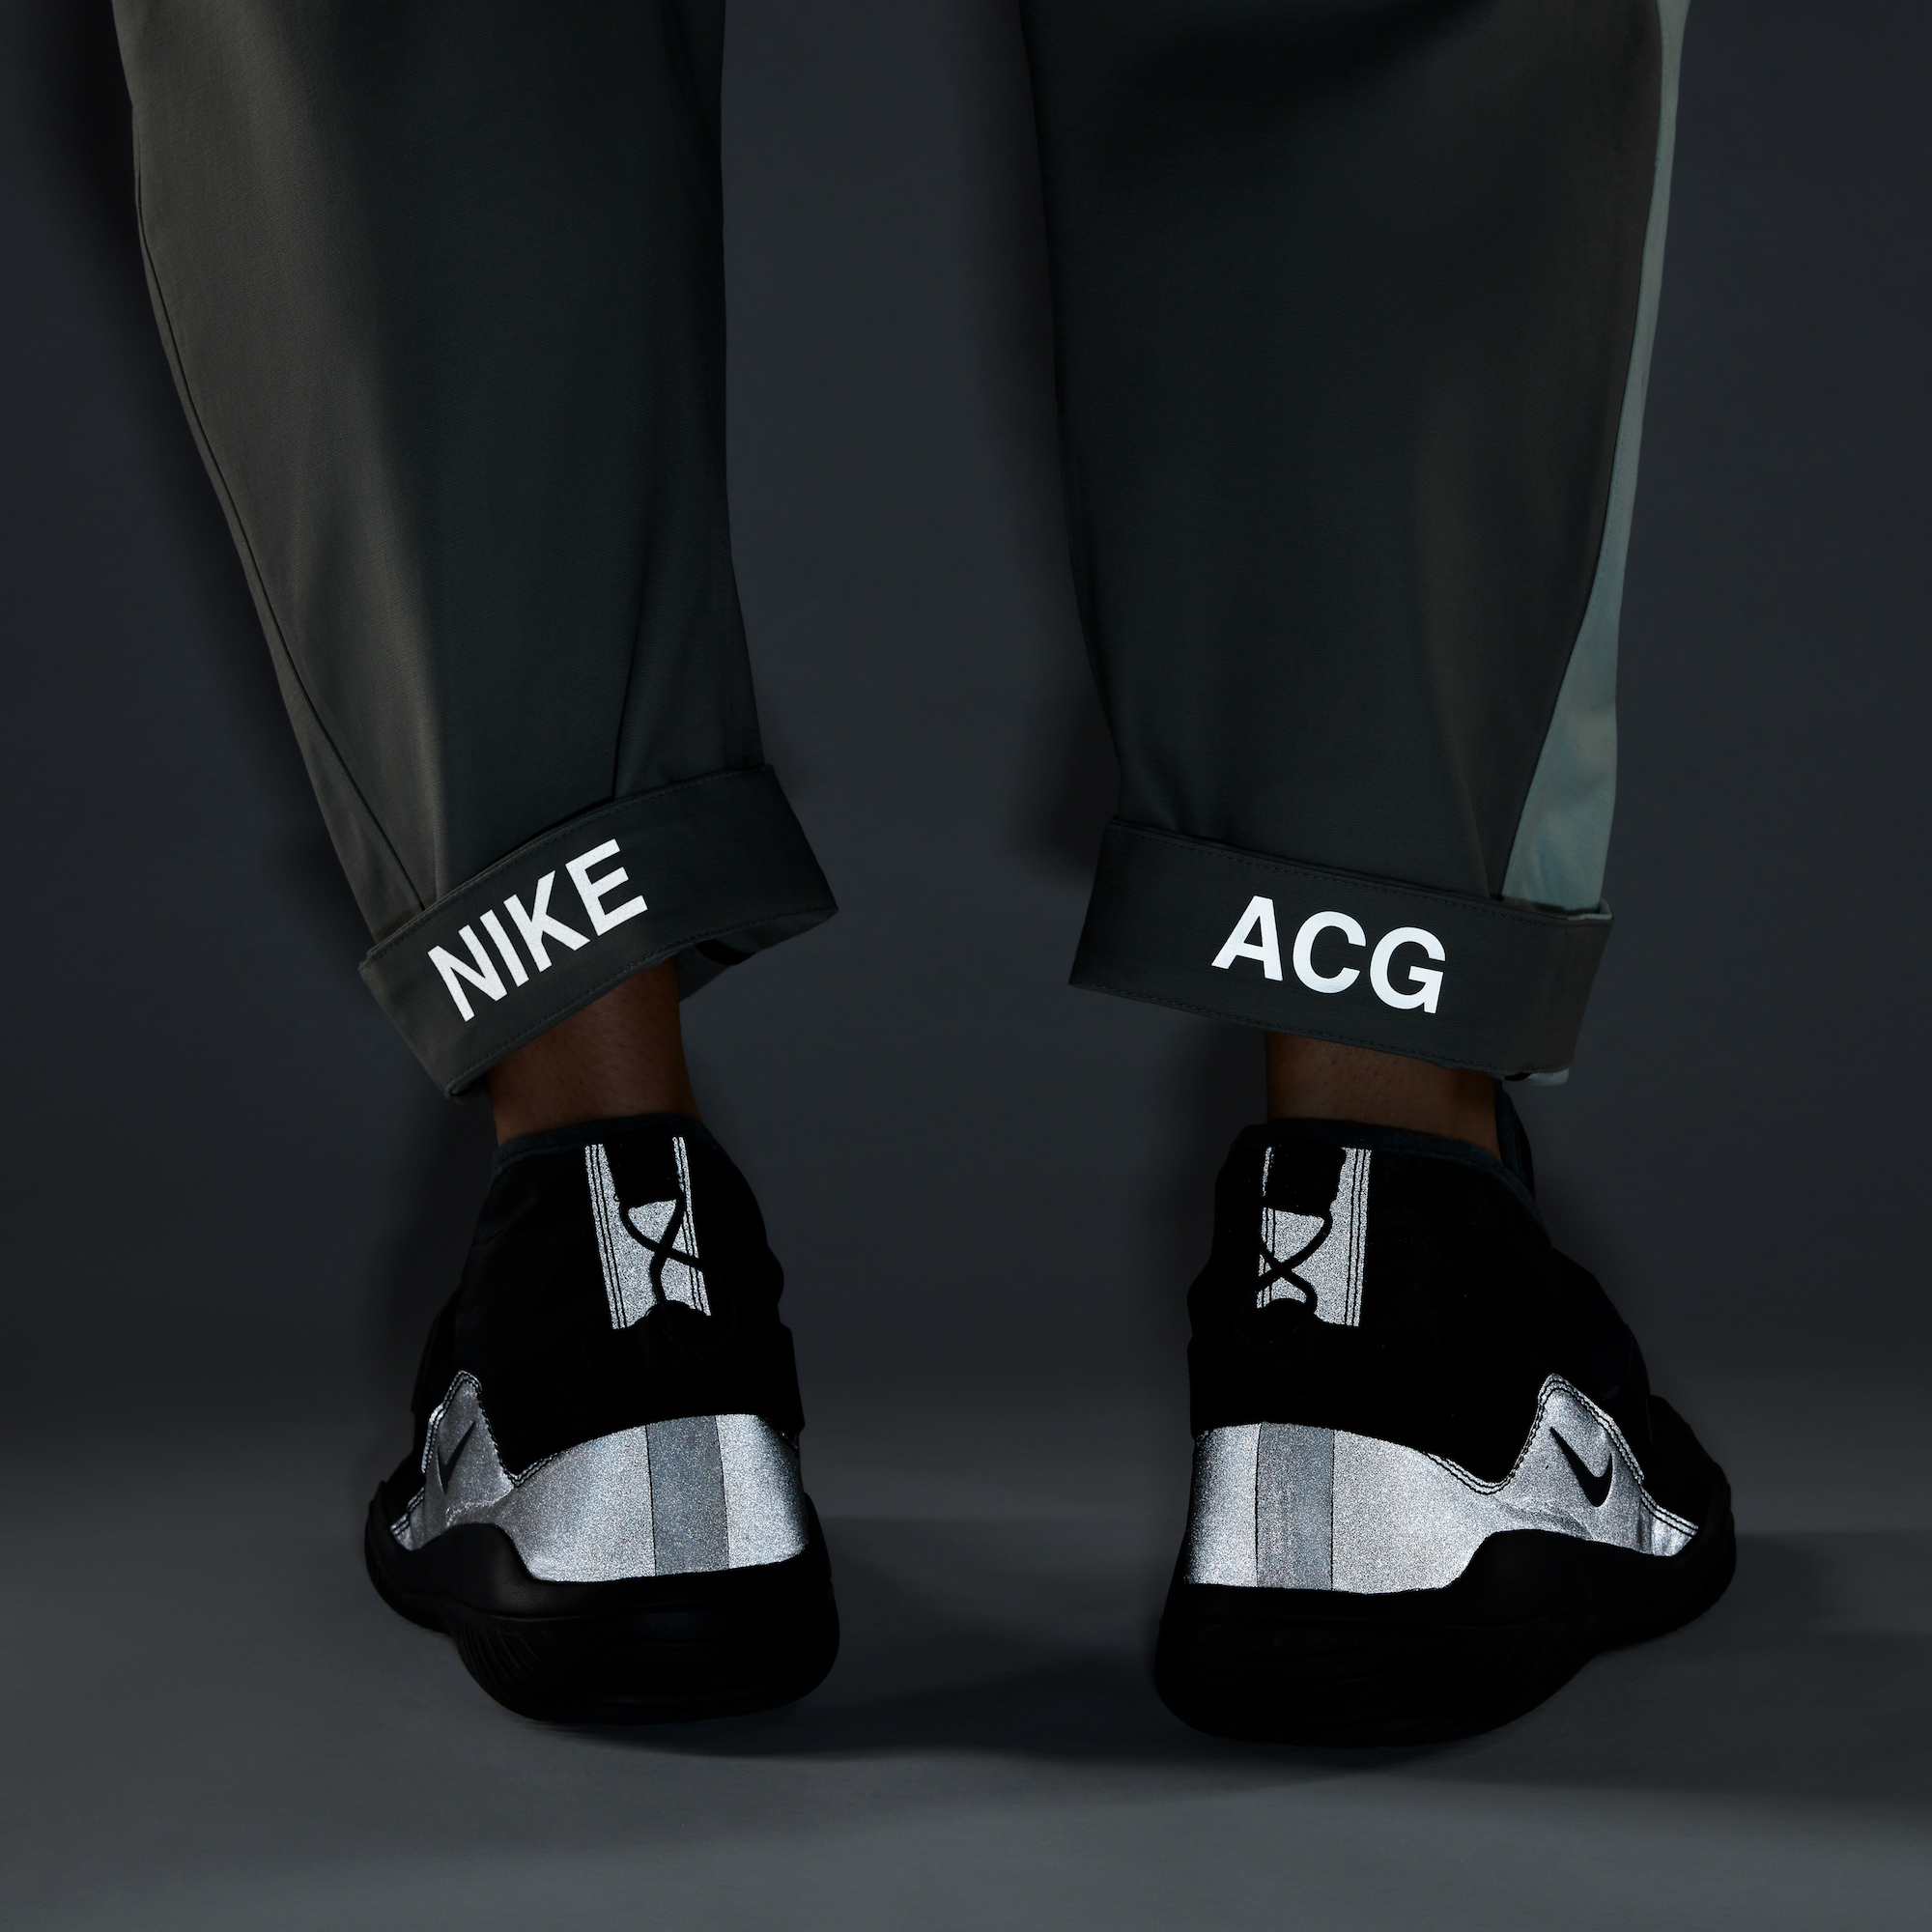 Match the "NIKE" reflective to "ACG". enhance the reflective on shoes.5hh